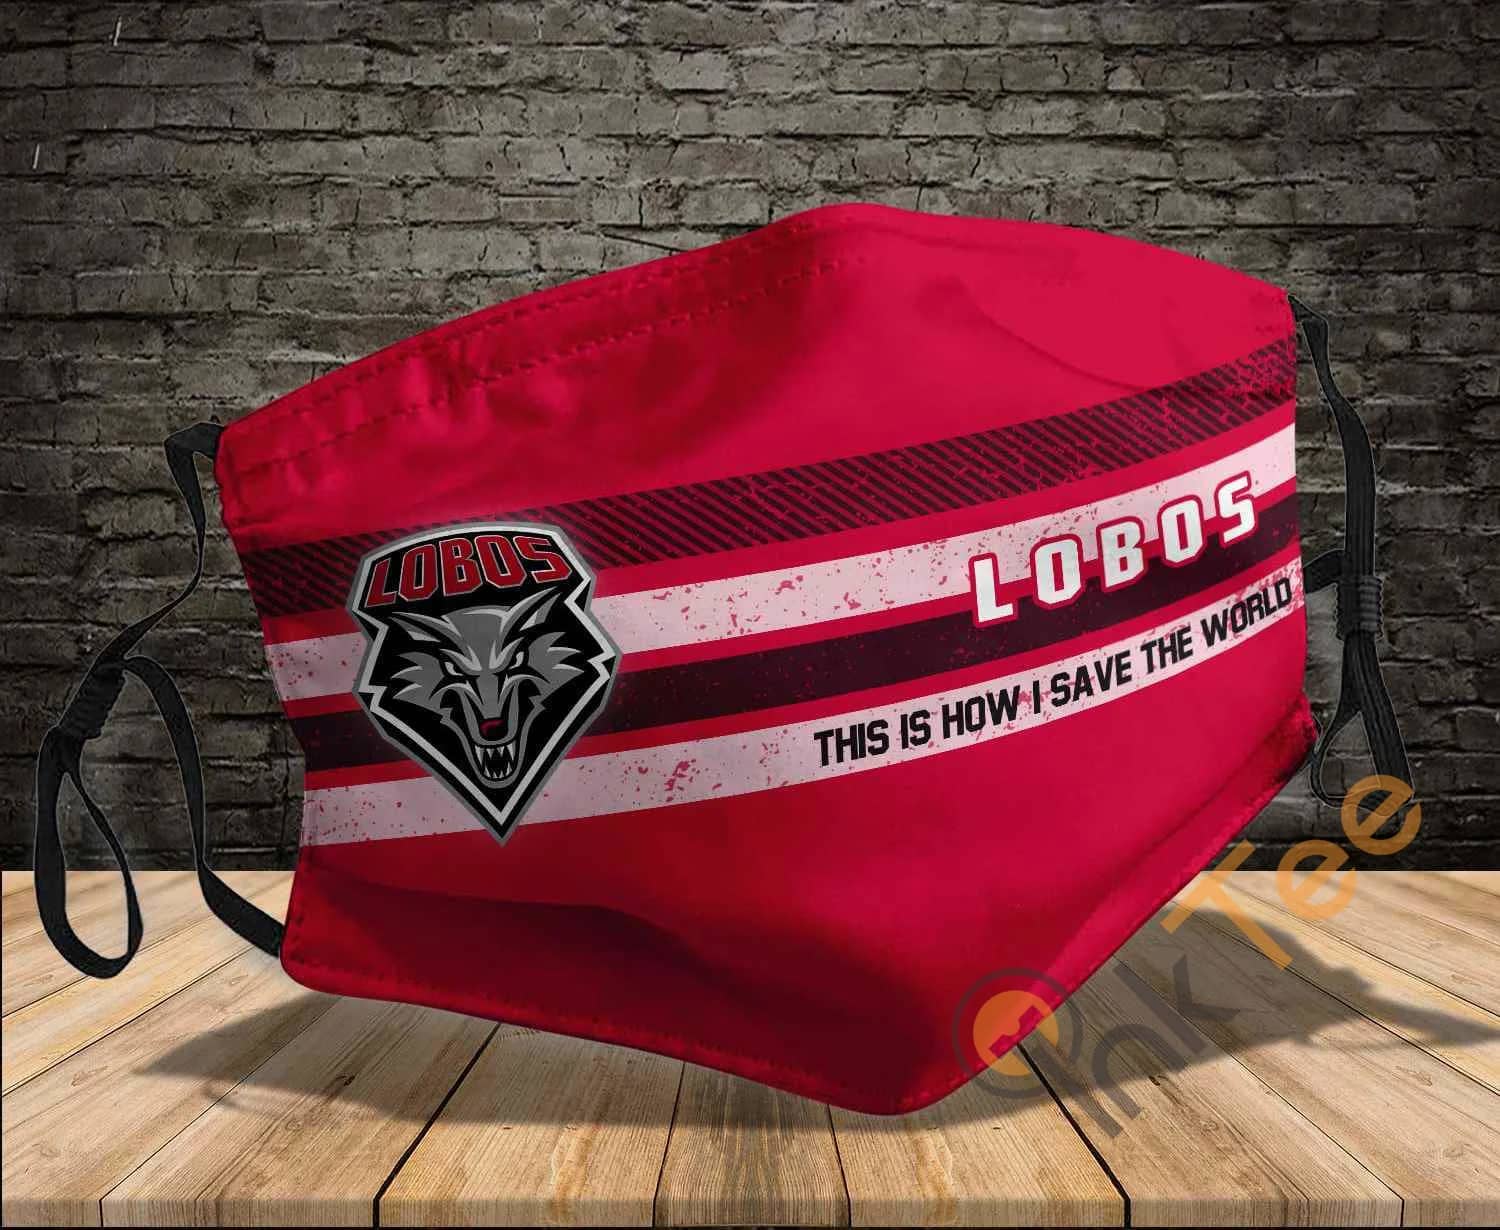 New Mexico Lobos Save The World Sku 805 Amazon Best Selling Face Mask